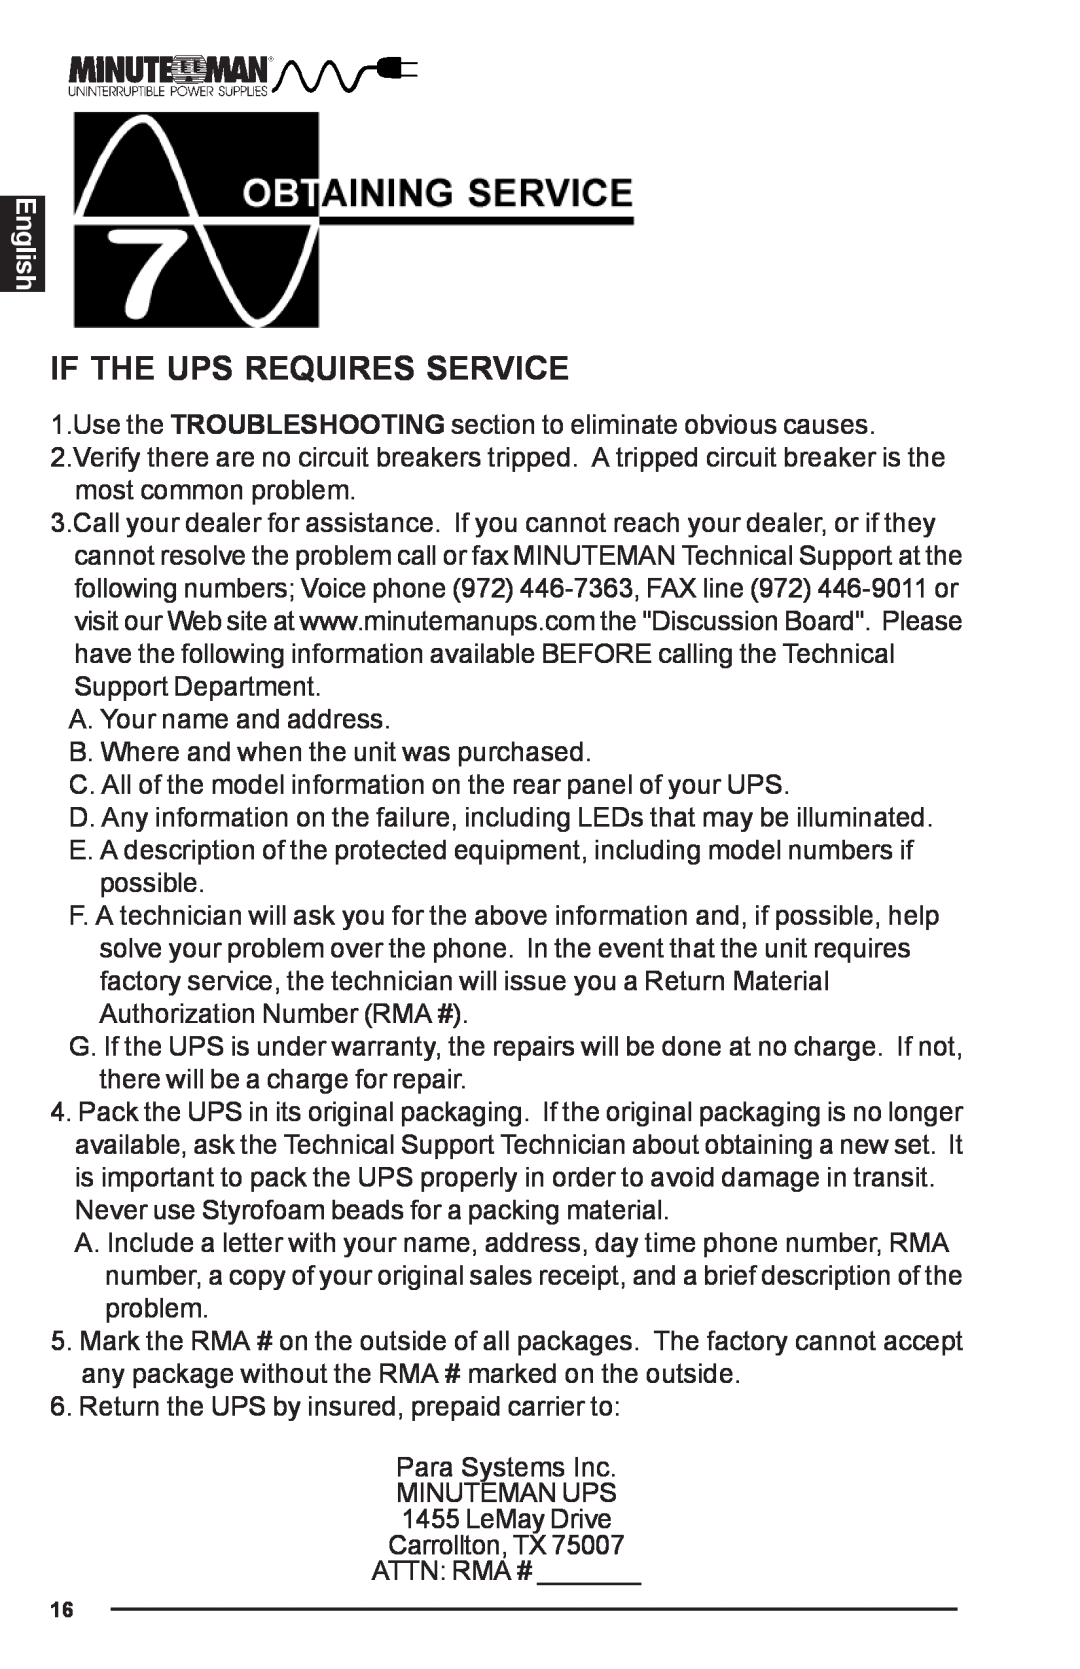 Minuteman UPS PRO-E user manual If The Ups Requires Service, English 